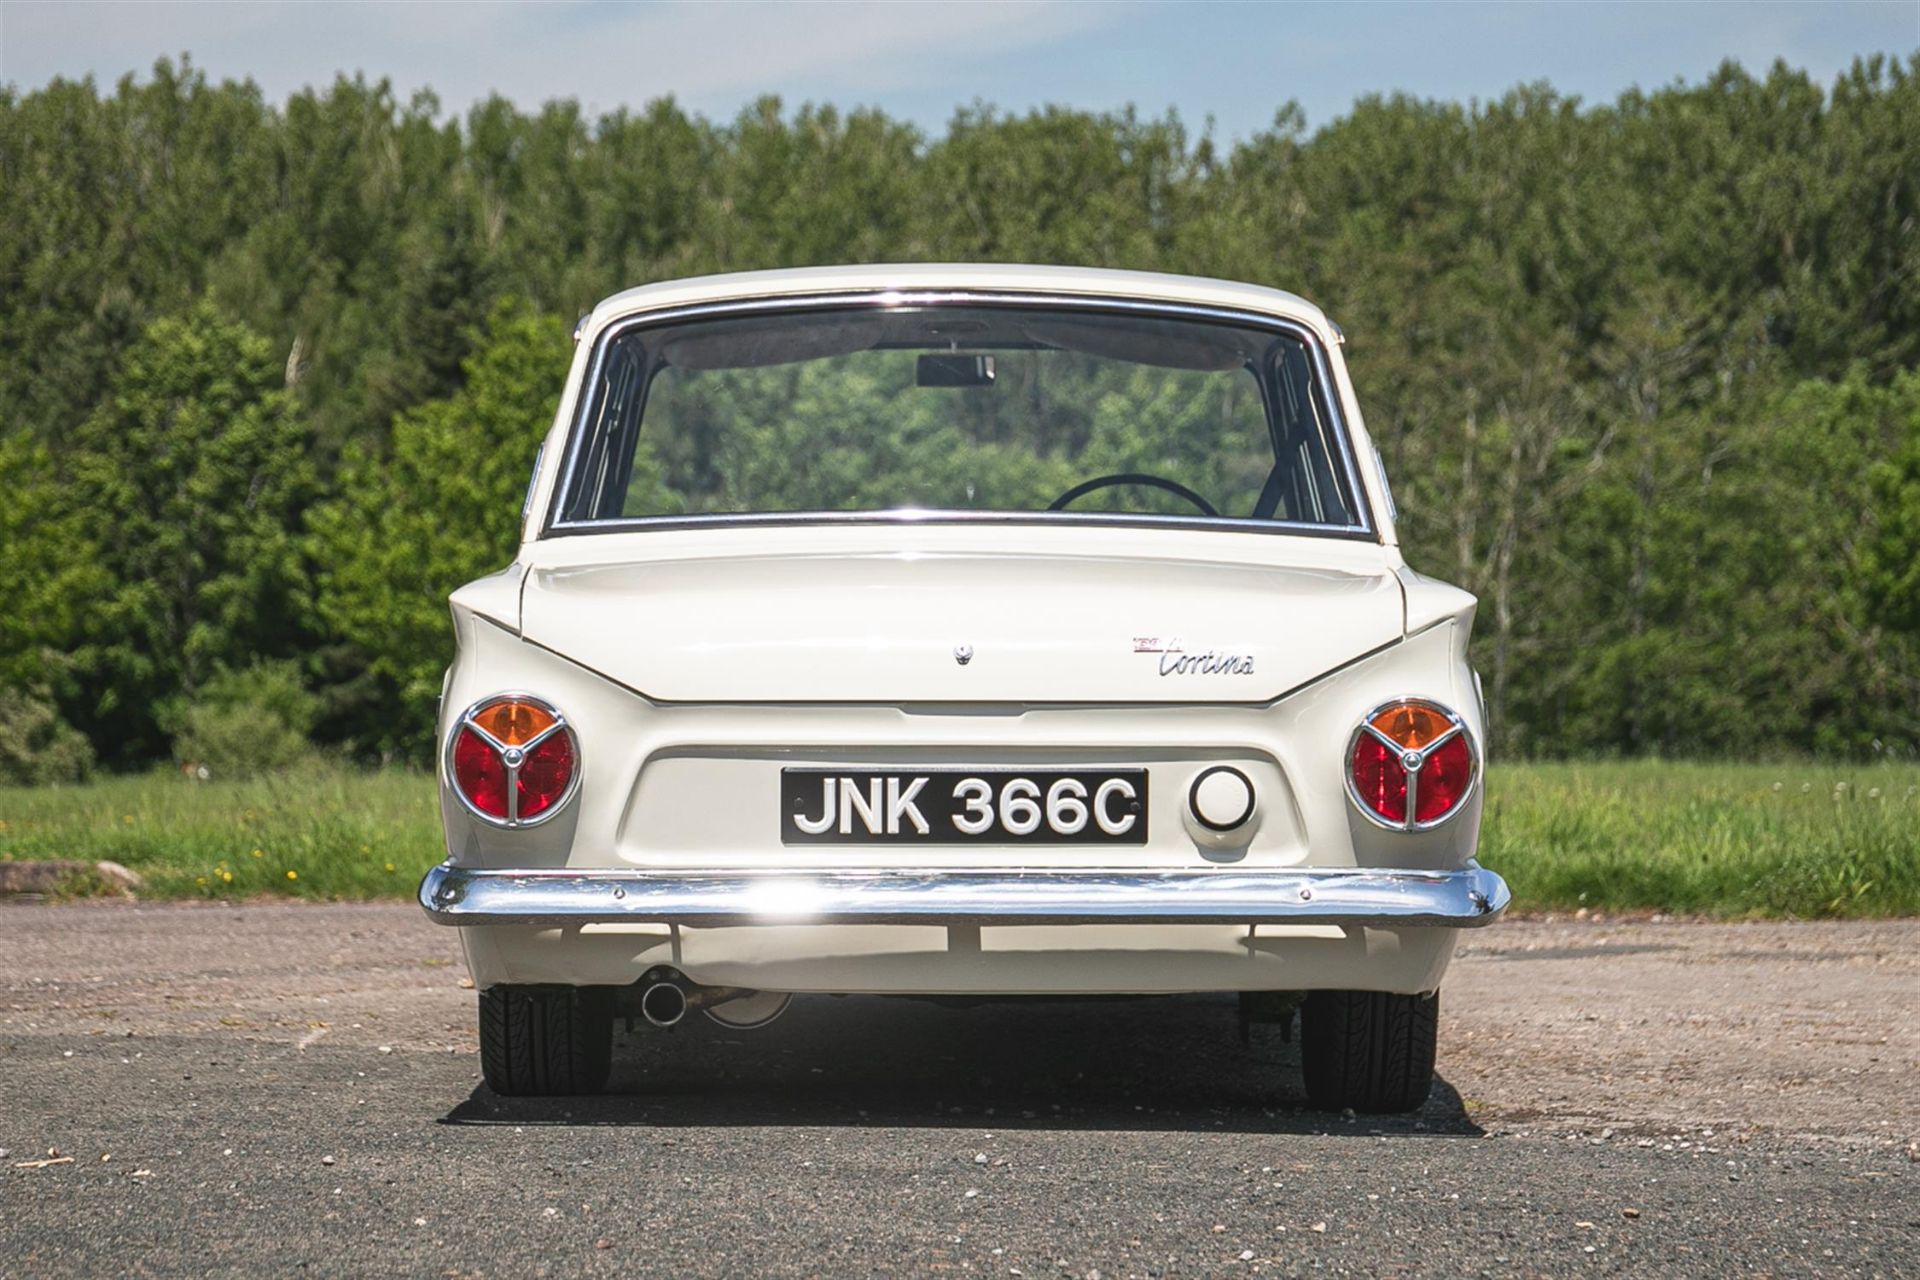 1965 Ford Cortina Mk1 1500 GT - Image 4 of 5